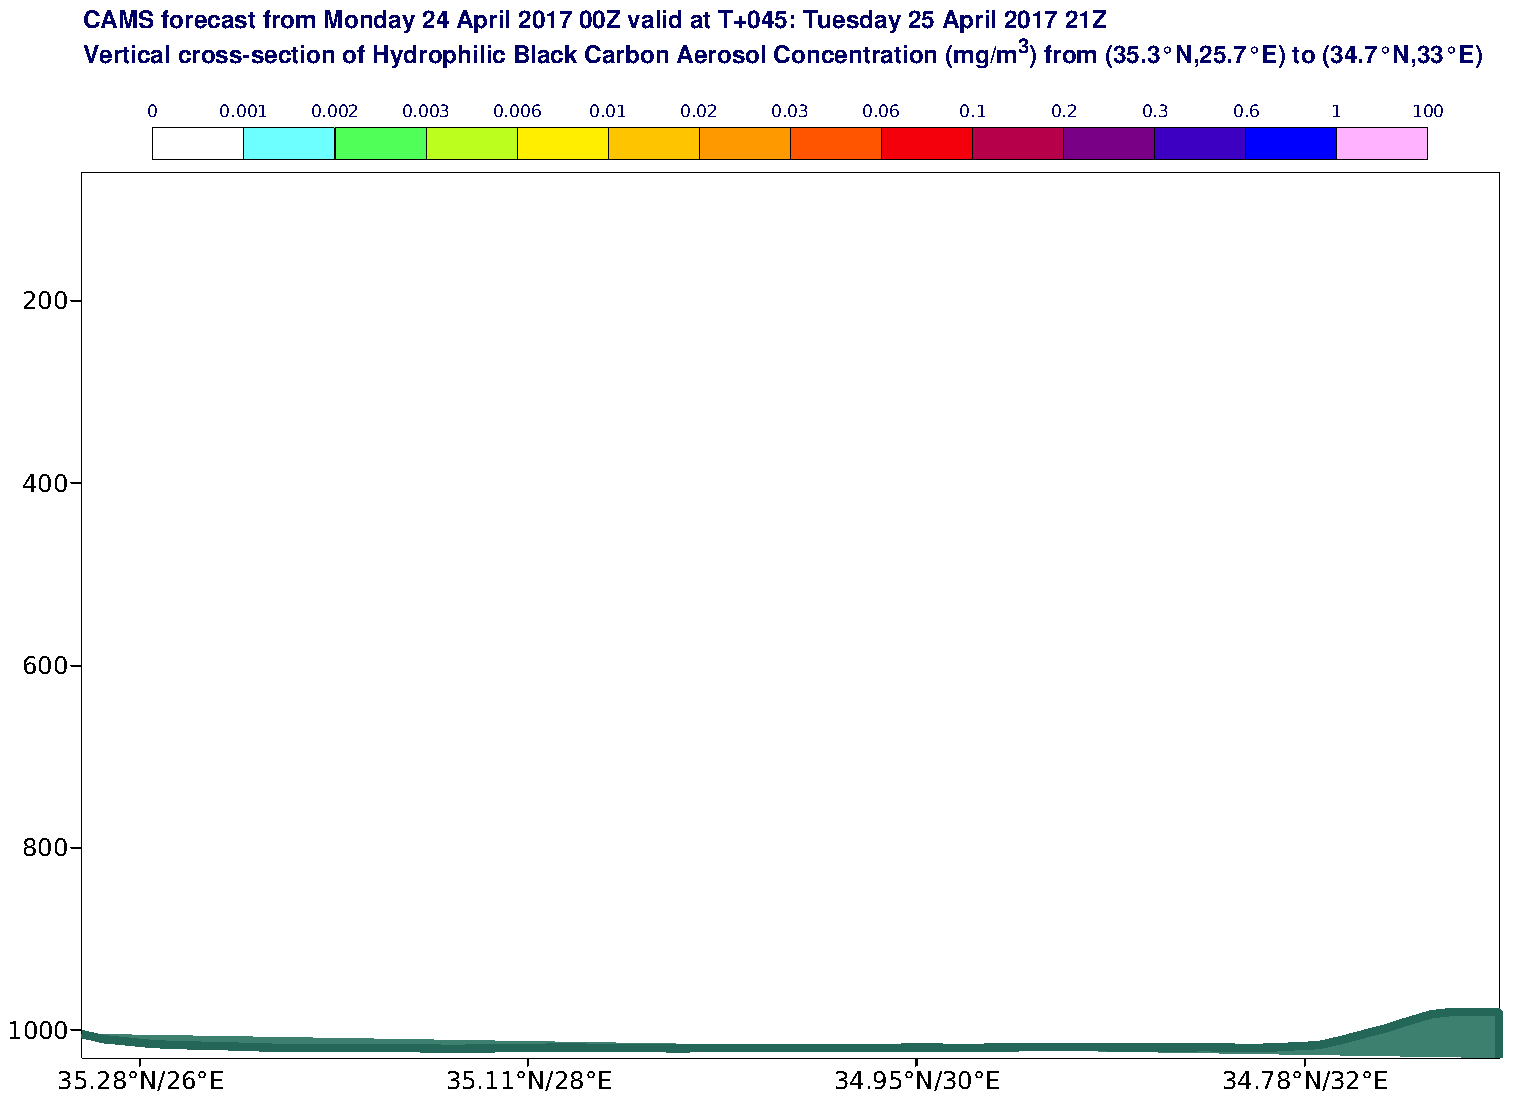 Vertical cross-section of Hydrophilic Black Carbon Aerosol Concentration (mg/m3) valid at T45 - 2017-04-25 21:00